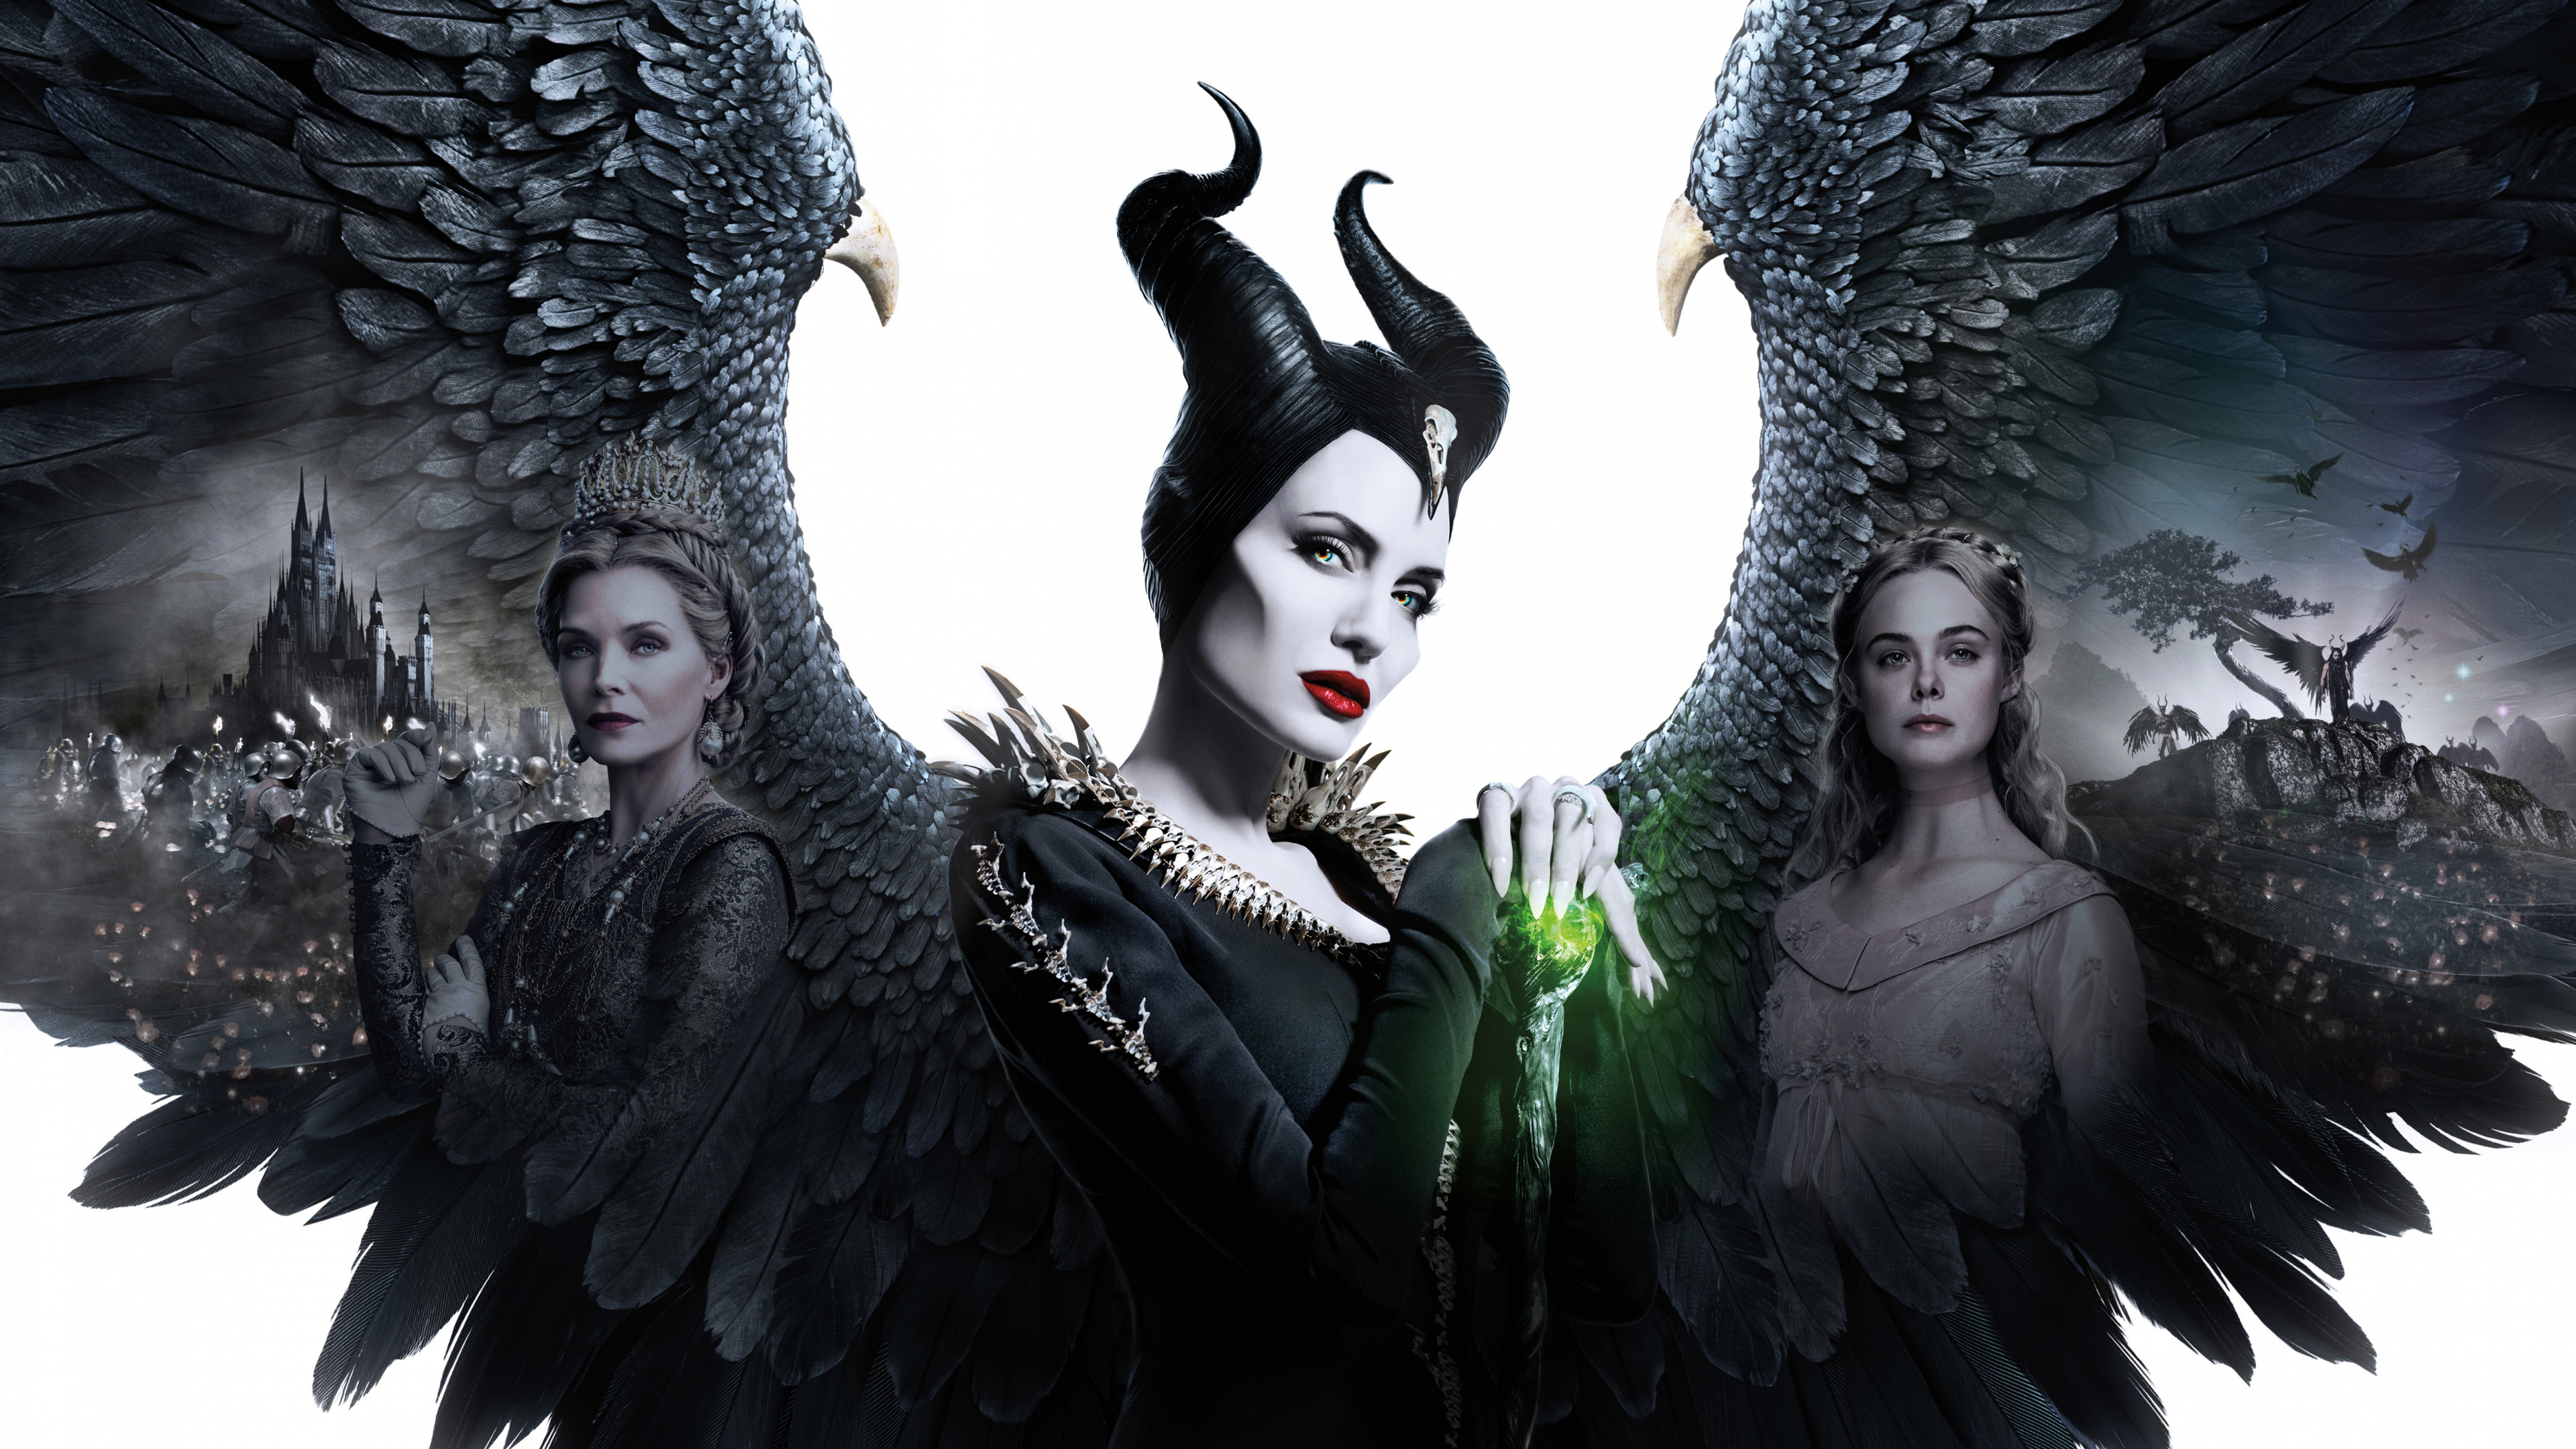 Download wallpaper 3840x2160 movie, fantasy movie, witch, maleficent:  mistress of evil 4k wallpaper, uhd wallpaper, 16:9 widescreen 3840x2160 hd  background, 23064